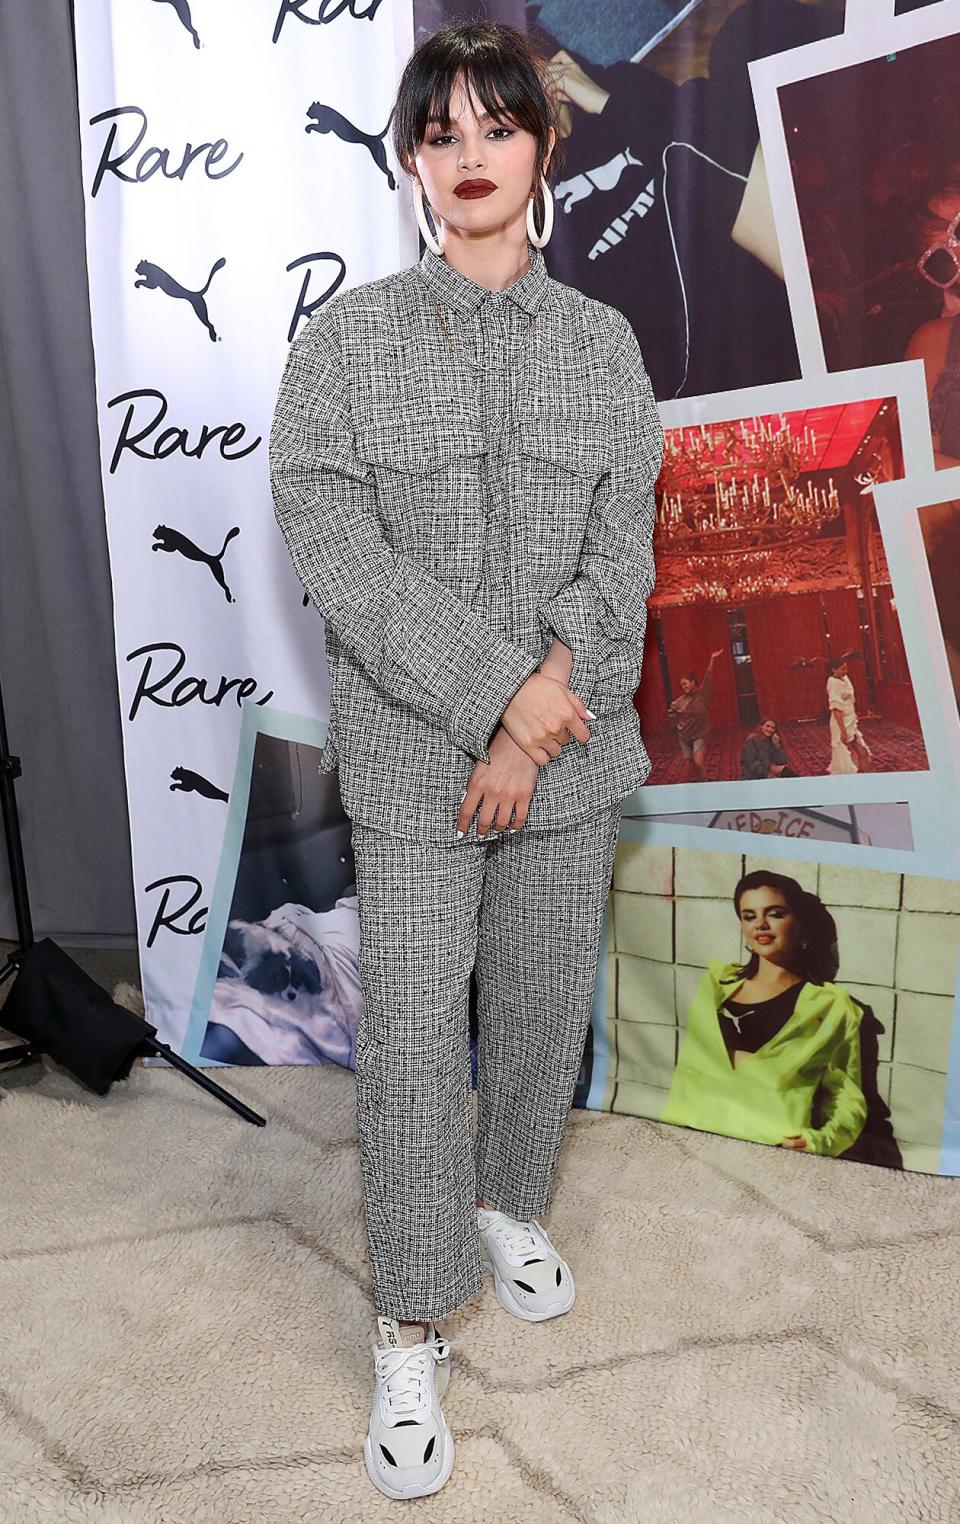 Selena Gomez poses during the Meet & Greet with Selena Gomez at PUMA Flagship on January 14, 2020 in New York City